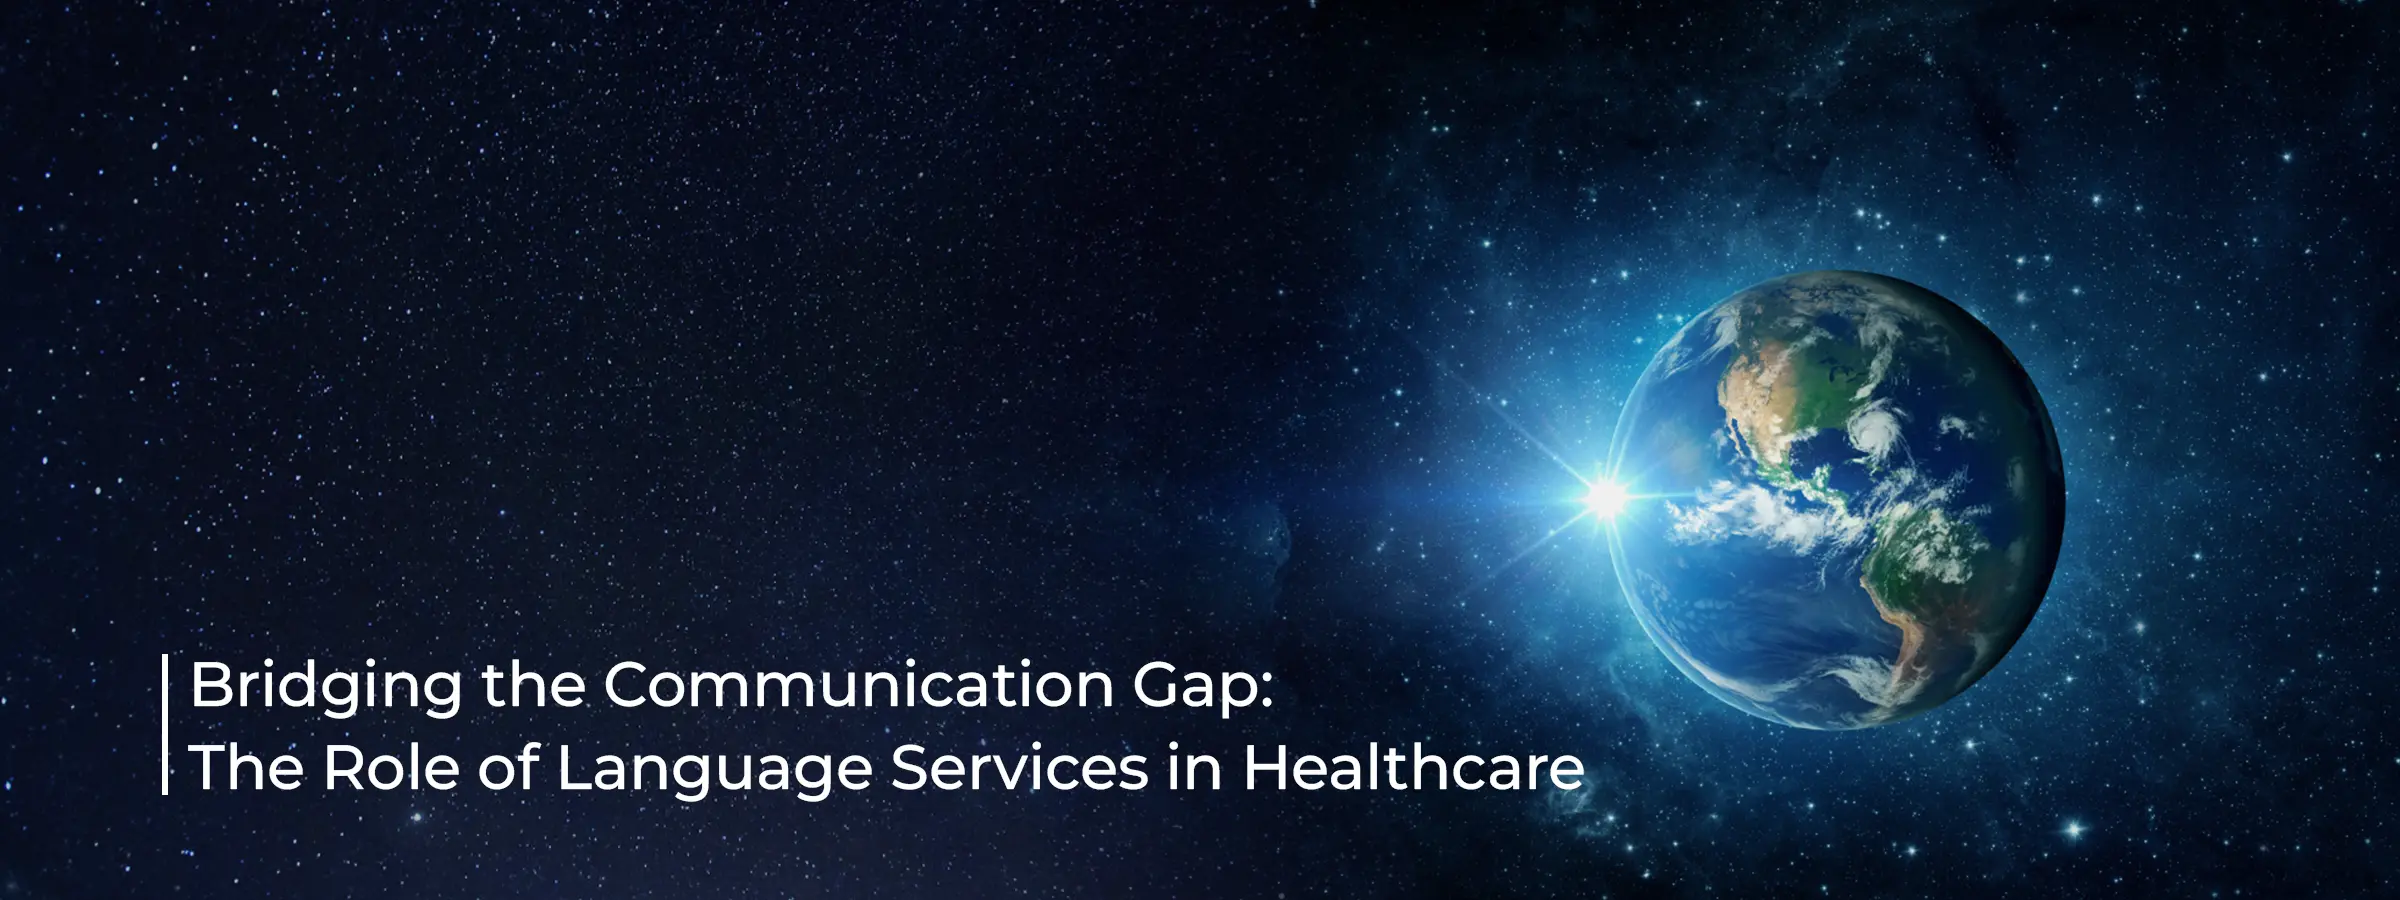 the-role-of-language-services-in-healthcare